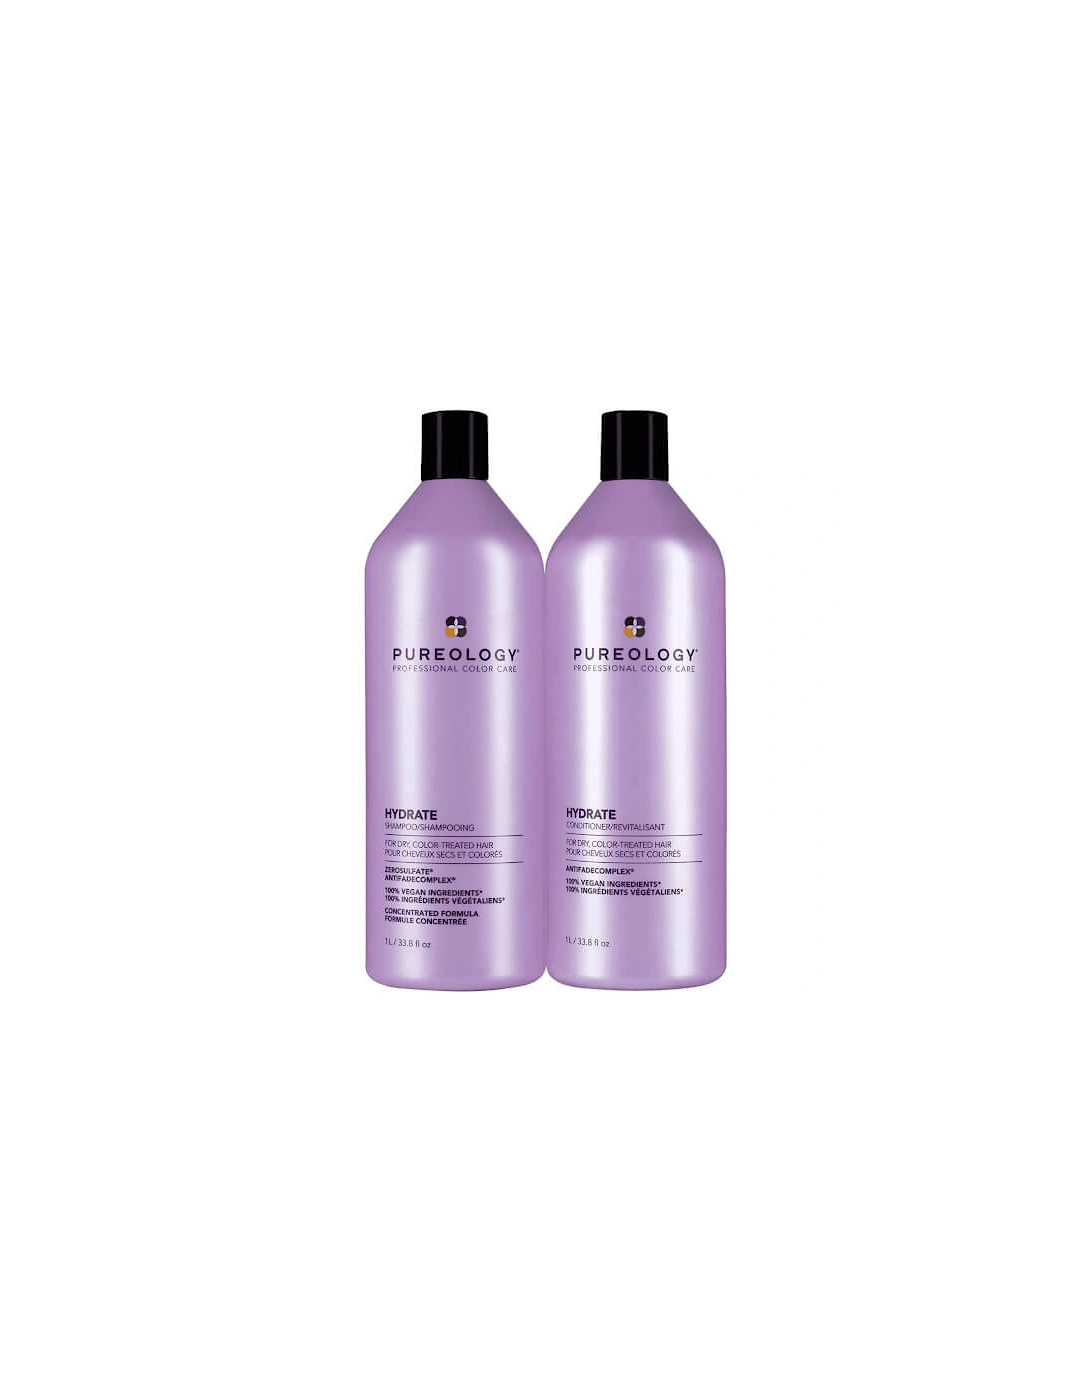 Hydrate Shampoo and Conditioner Moisturising Supersize Bundle for Dry Hair, Sulphate Free for a Gentle Cleanse, 2 of 1